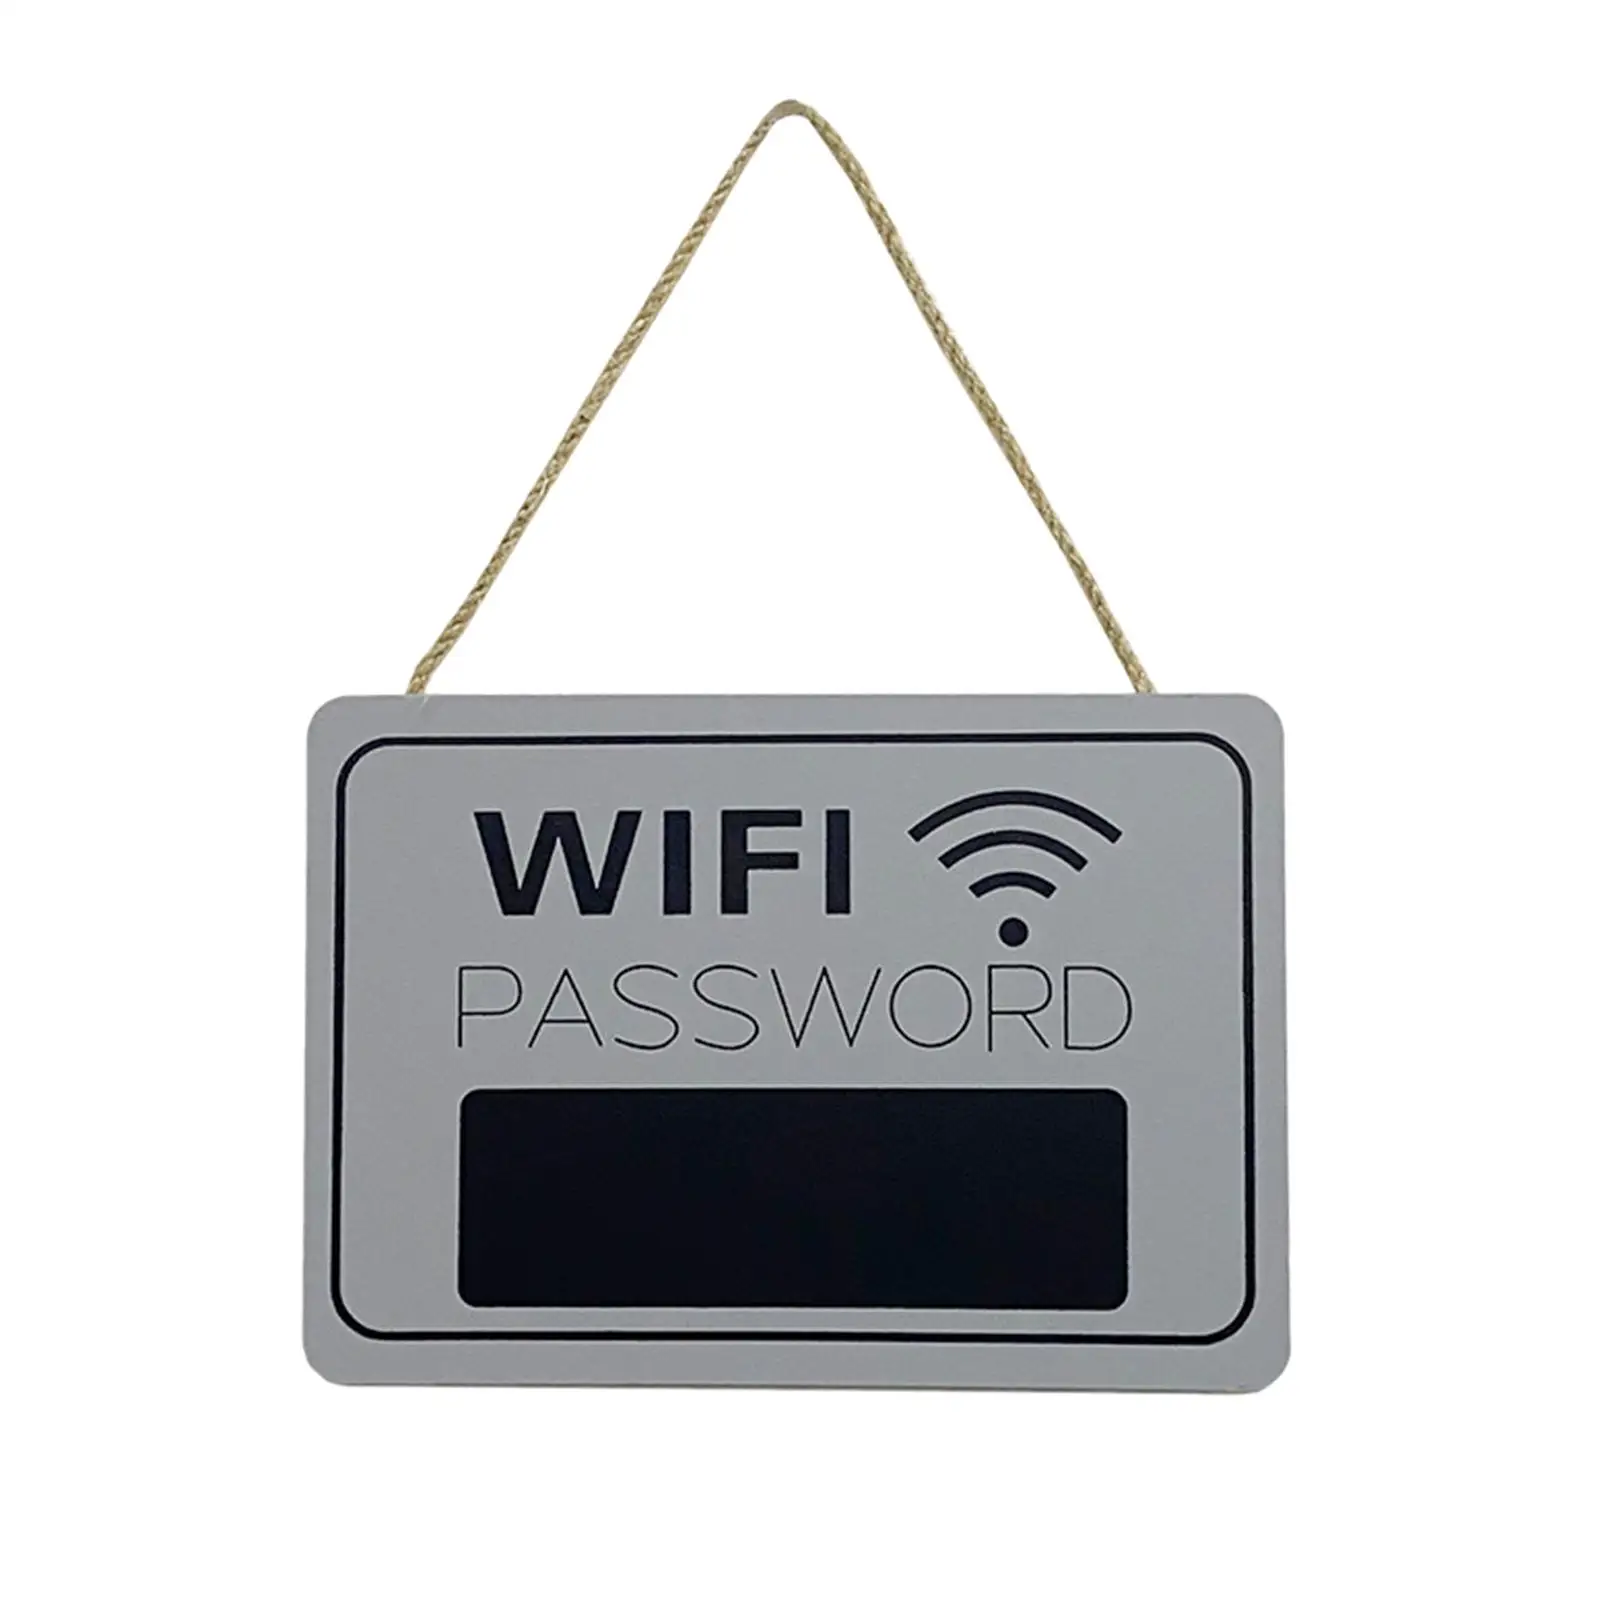 WiFi Password Sign WiFi Sign Display Holder for Centerpieces Home Reception